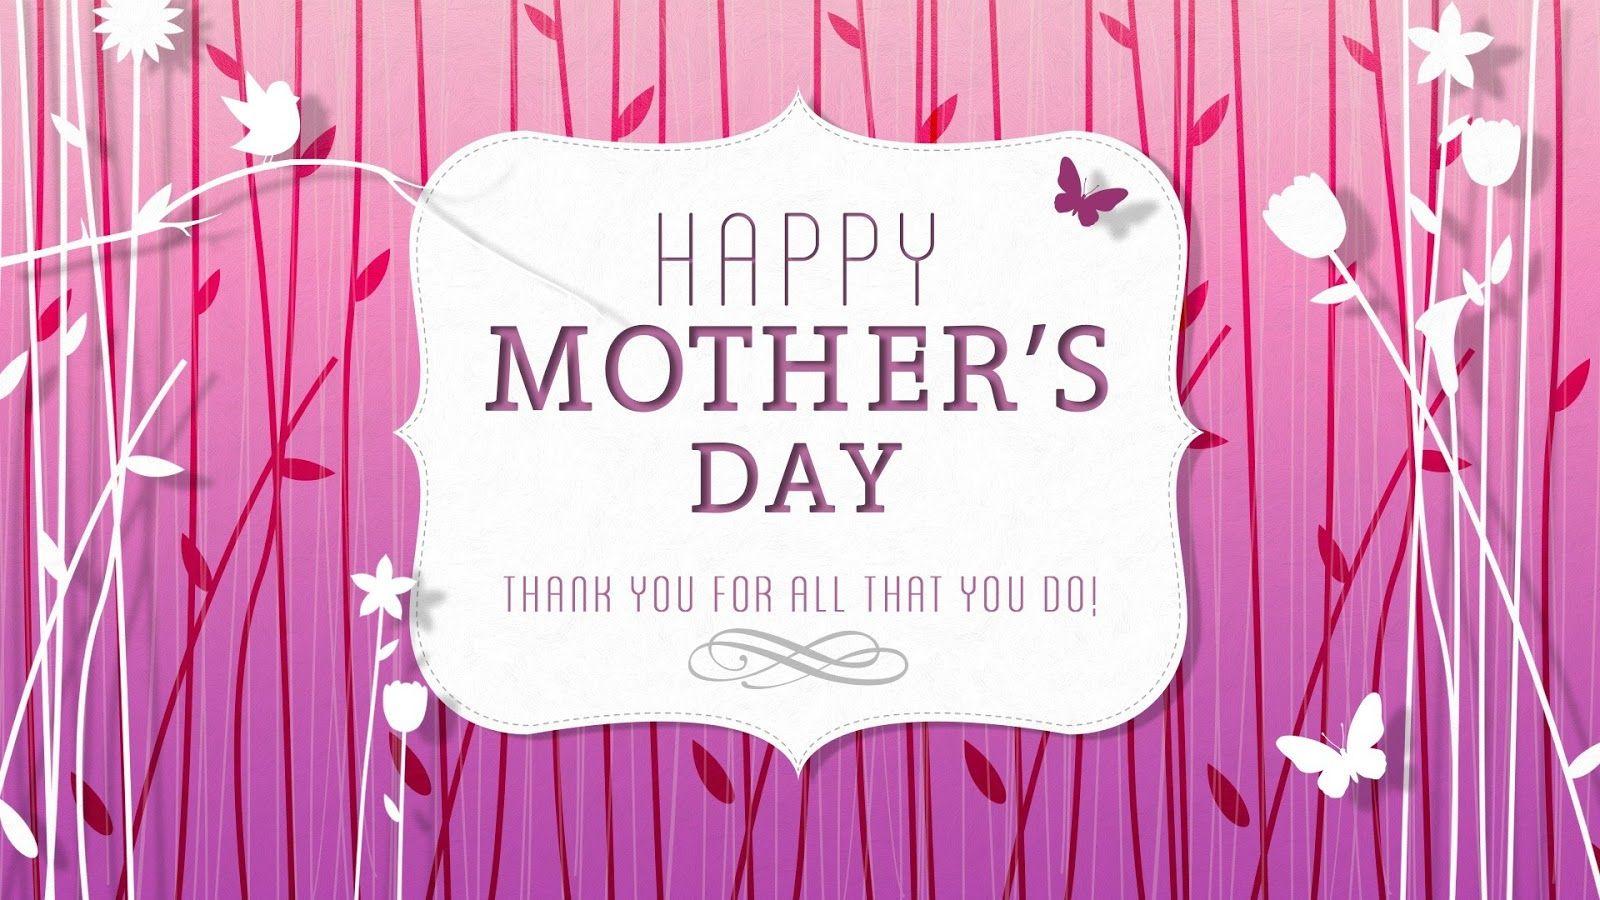 Mothers Day 2018 Gift Ideas SMS Wishes Messages Quotes Image